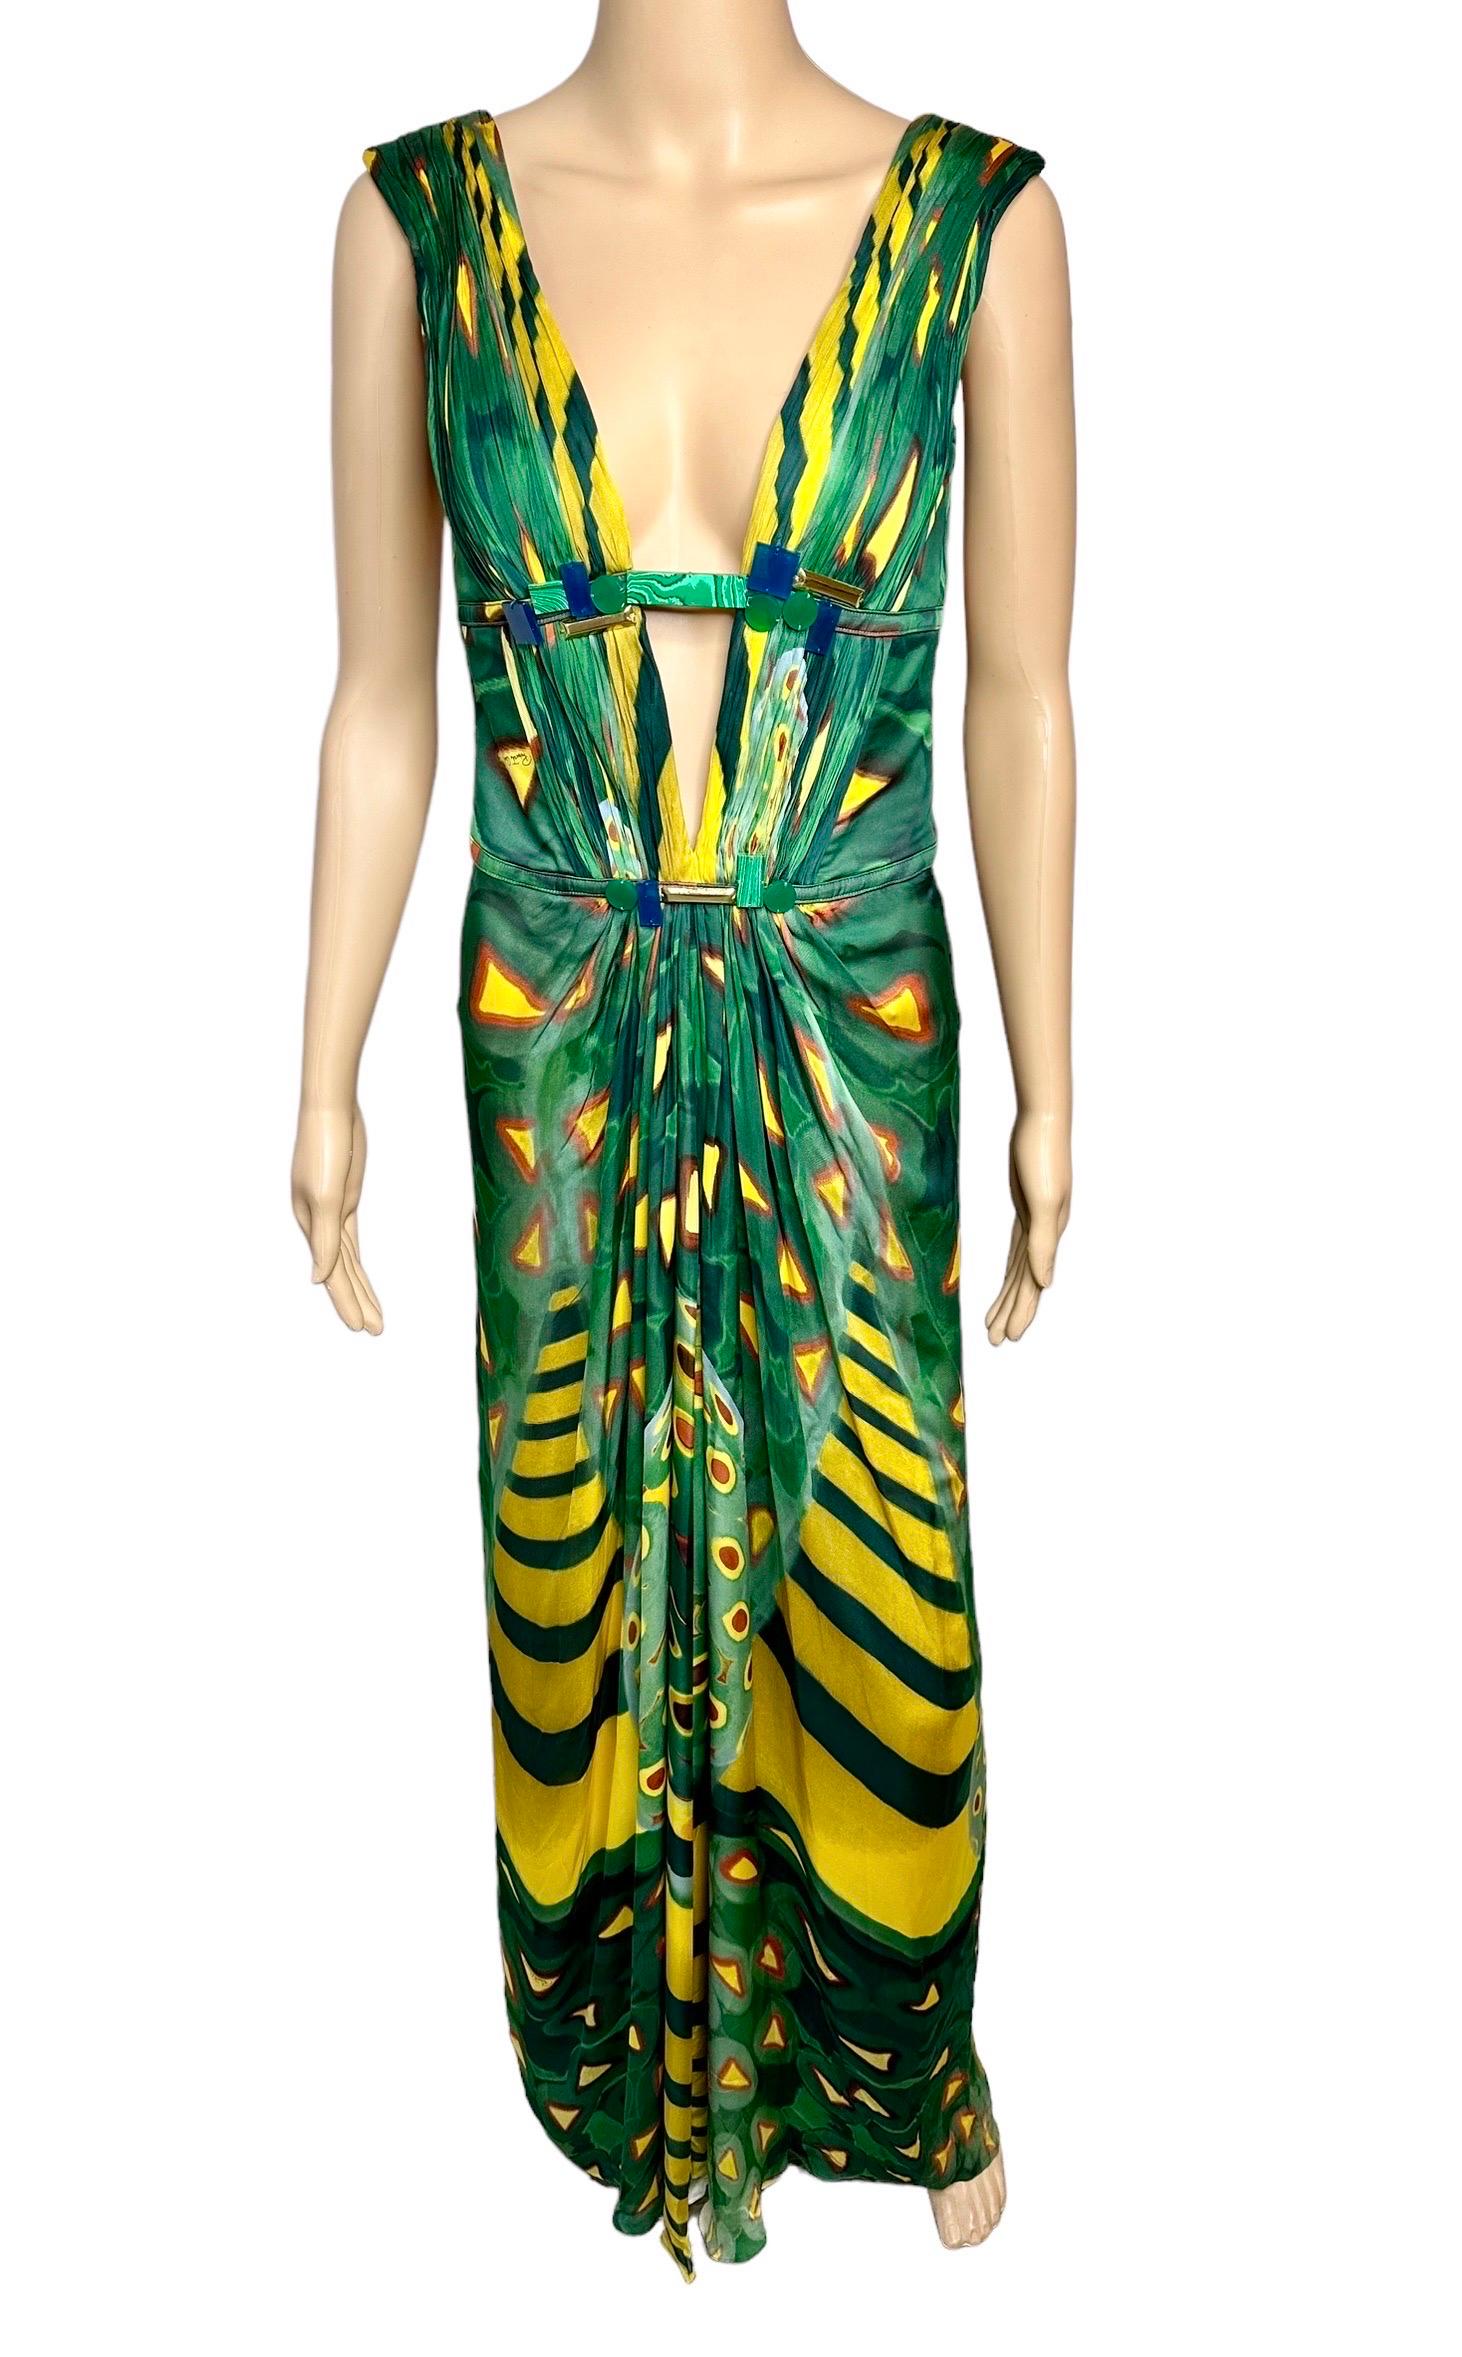 Roberto Cavalli S/S 2009 Plunging Neckline Open Back Evening Dress Gown For Sale 1